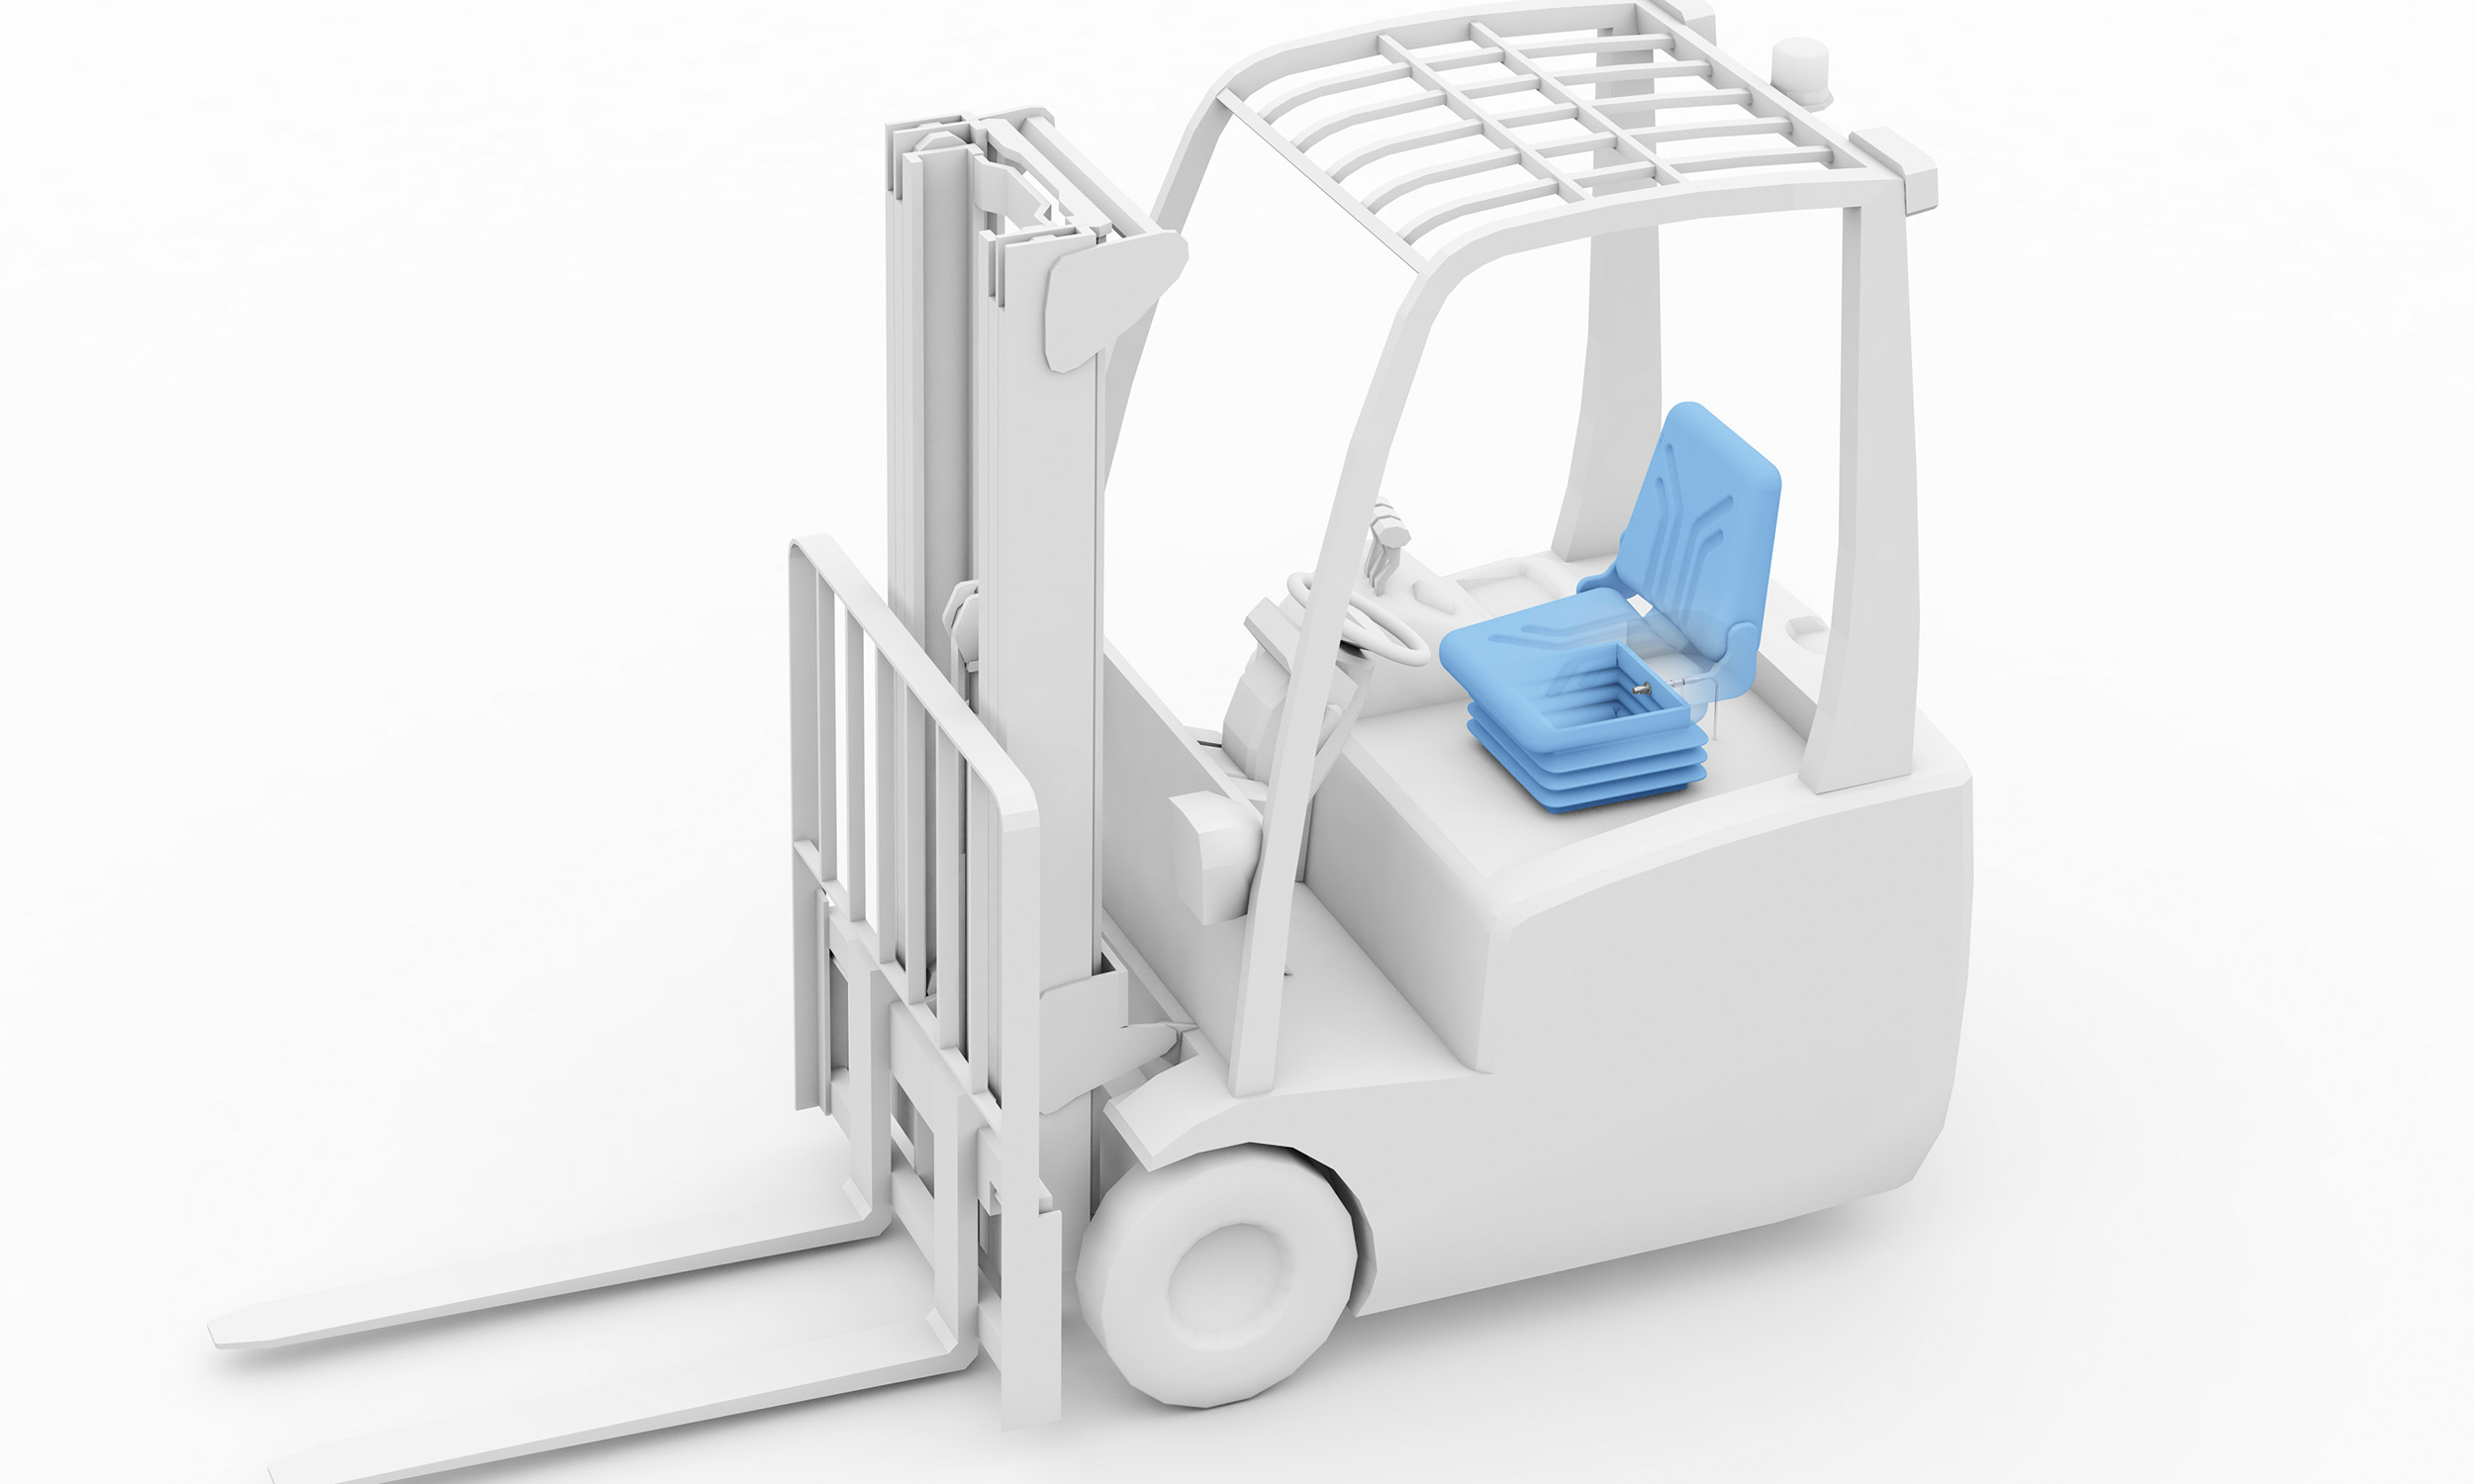 Forklifts: Checking whether the Seat is Occupied image